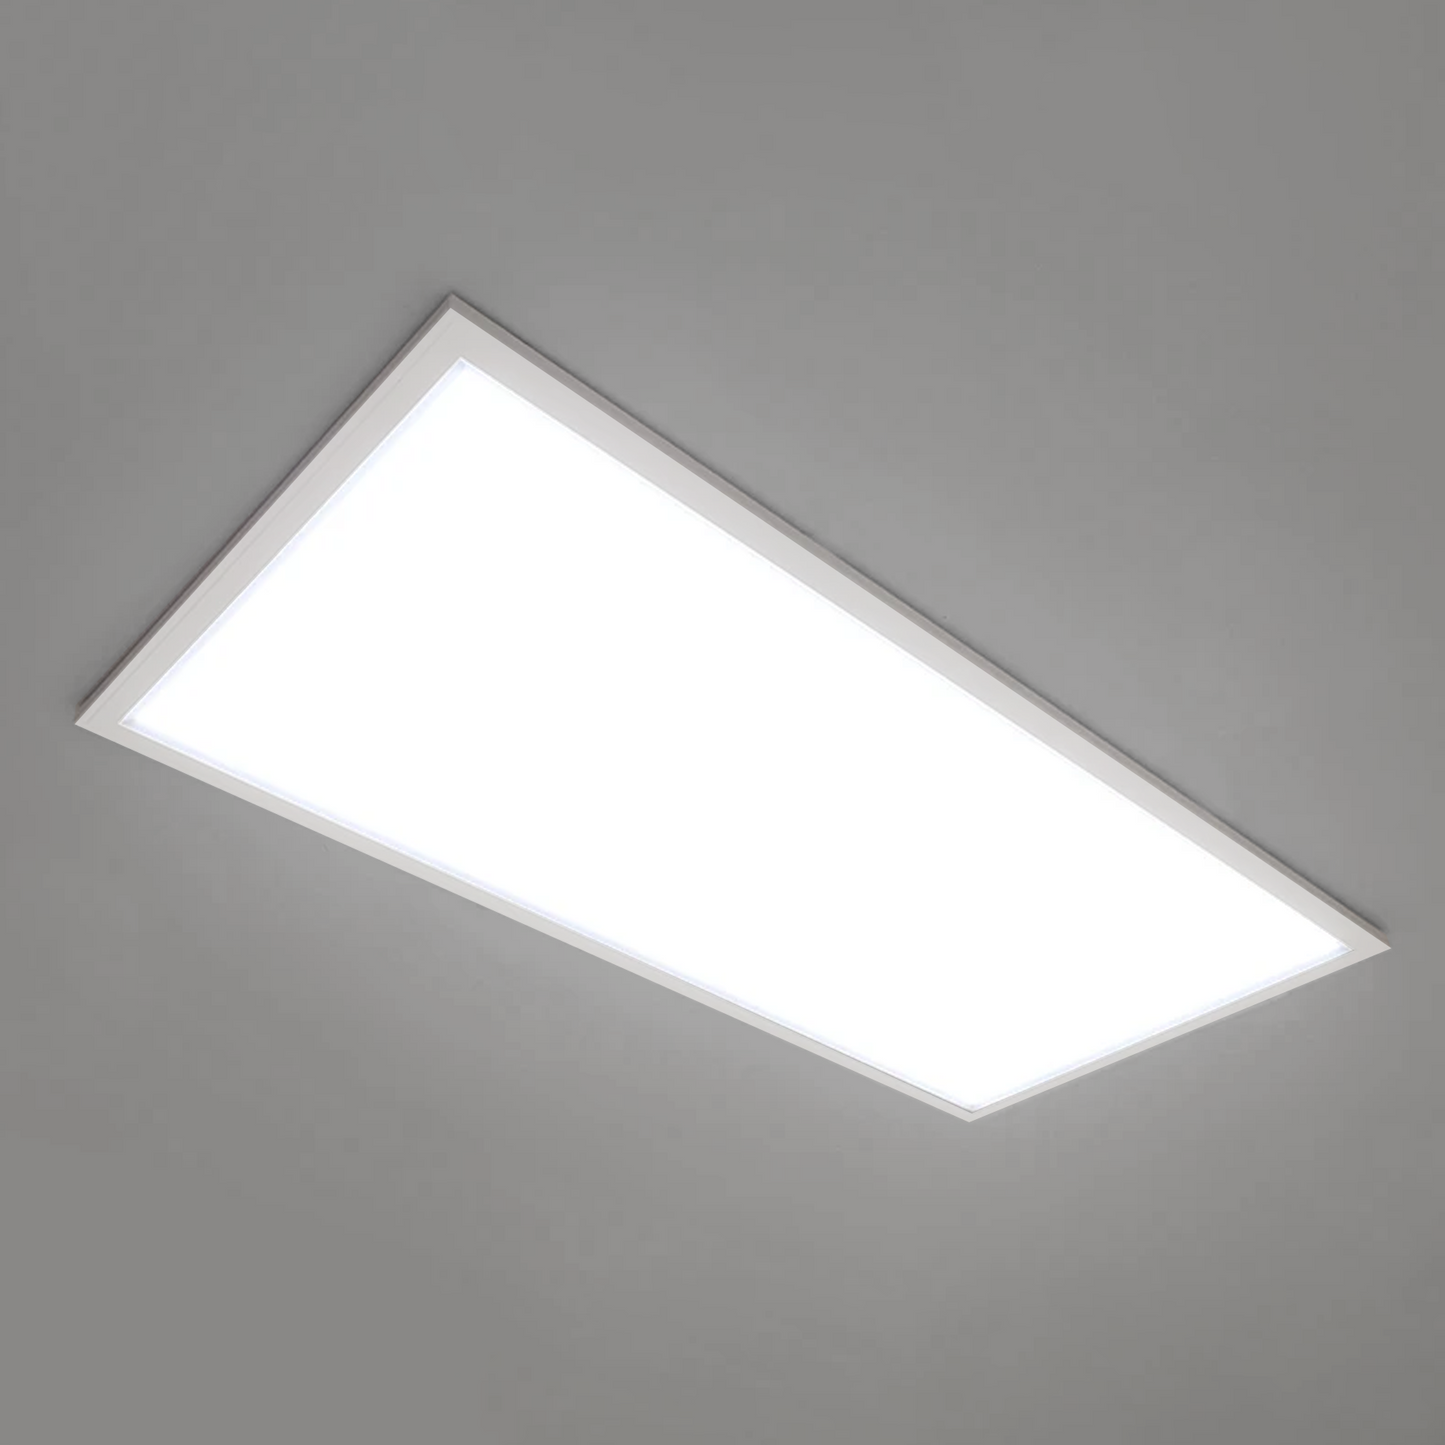 2 ft. X 4 ft. LED Panel Light 4000K Neutral White 72W 9000LM Dimmable, AC120V-277V, UL, DLC Listed, Damp Location, Flat Backlit Fixture, Recessed/Drop Ceiling Install